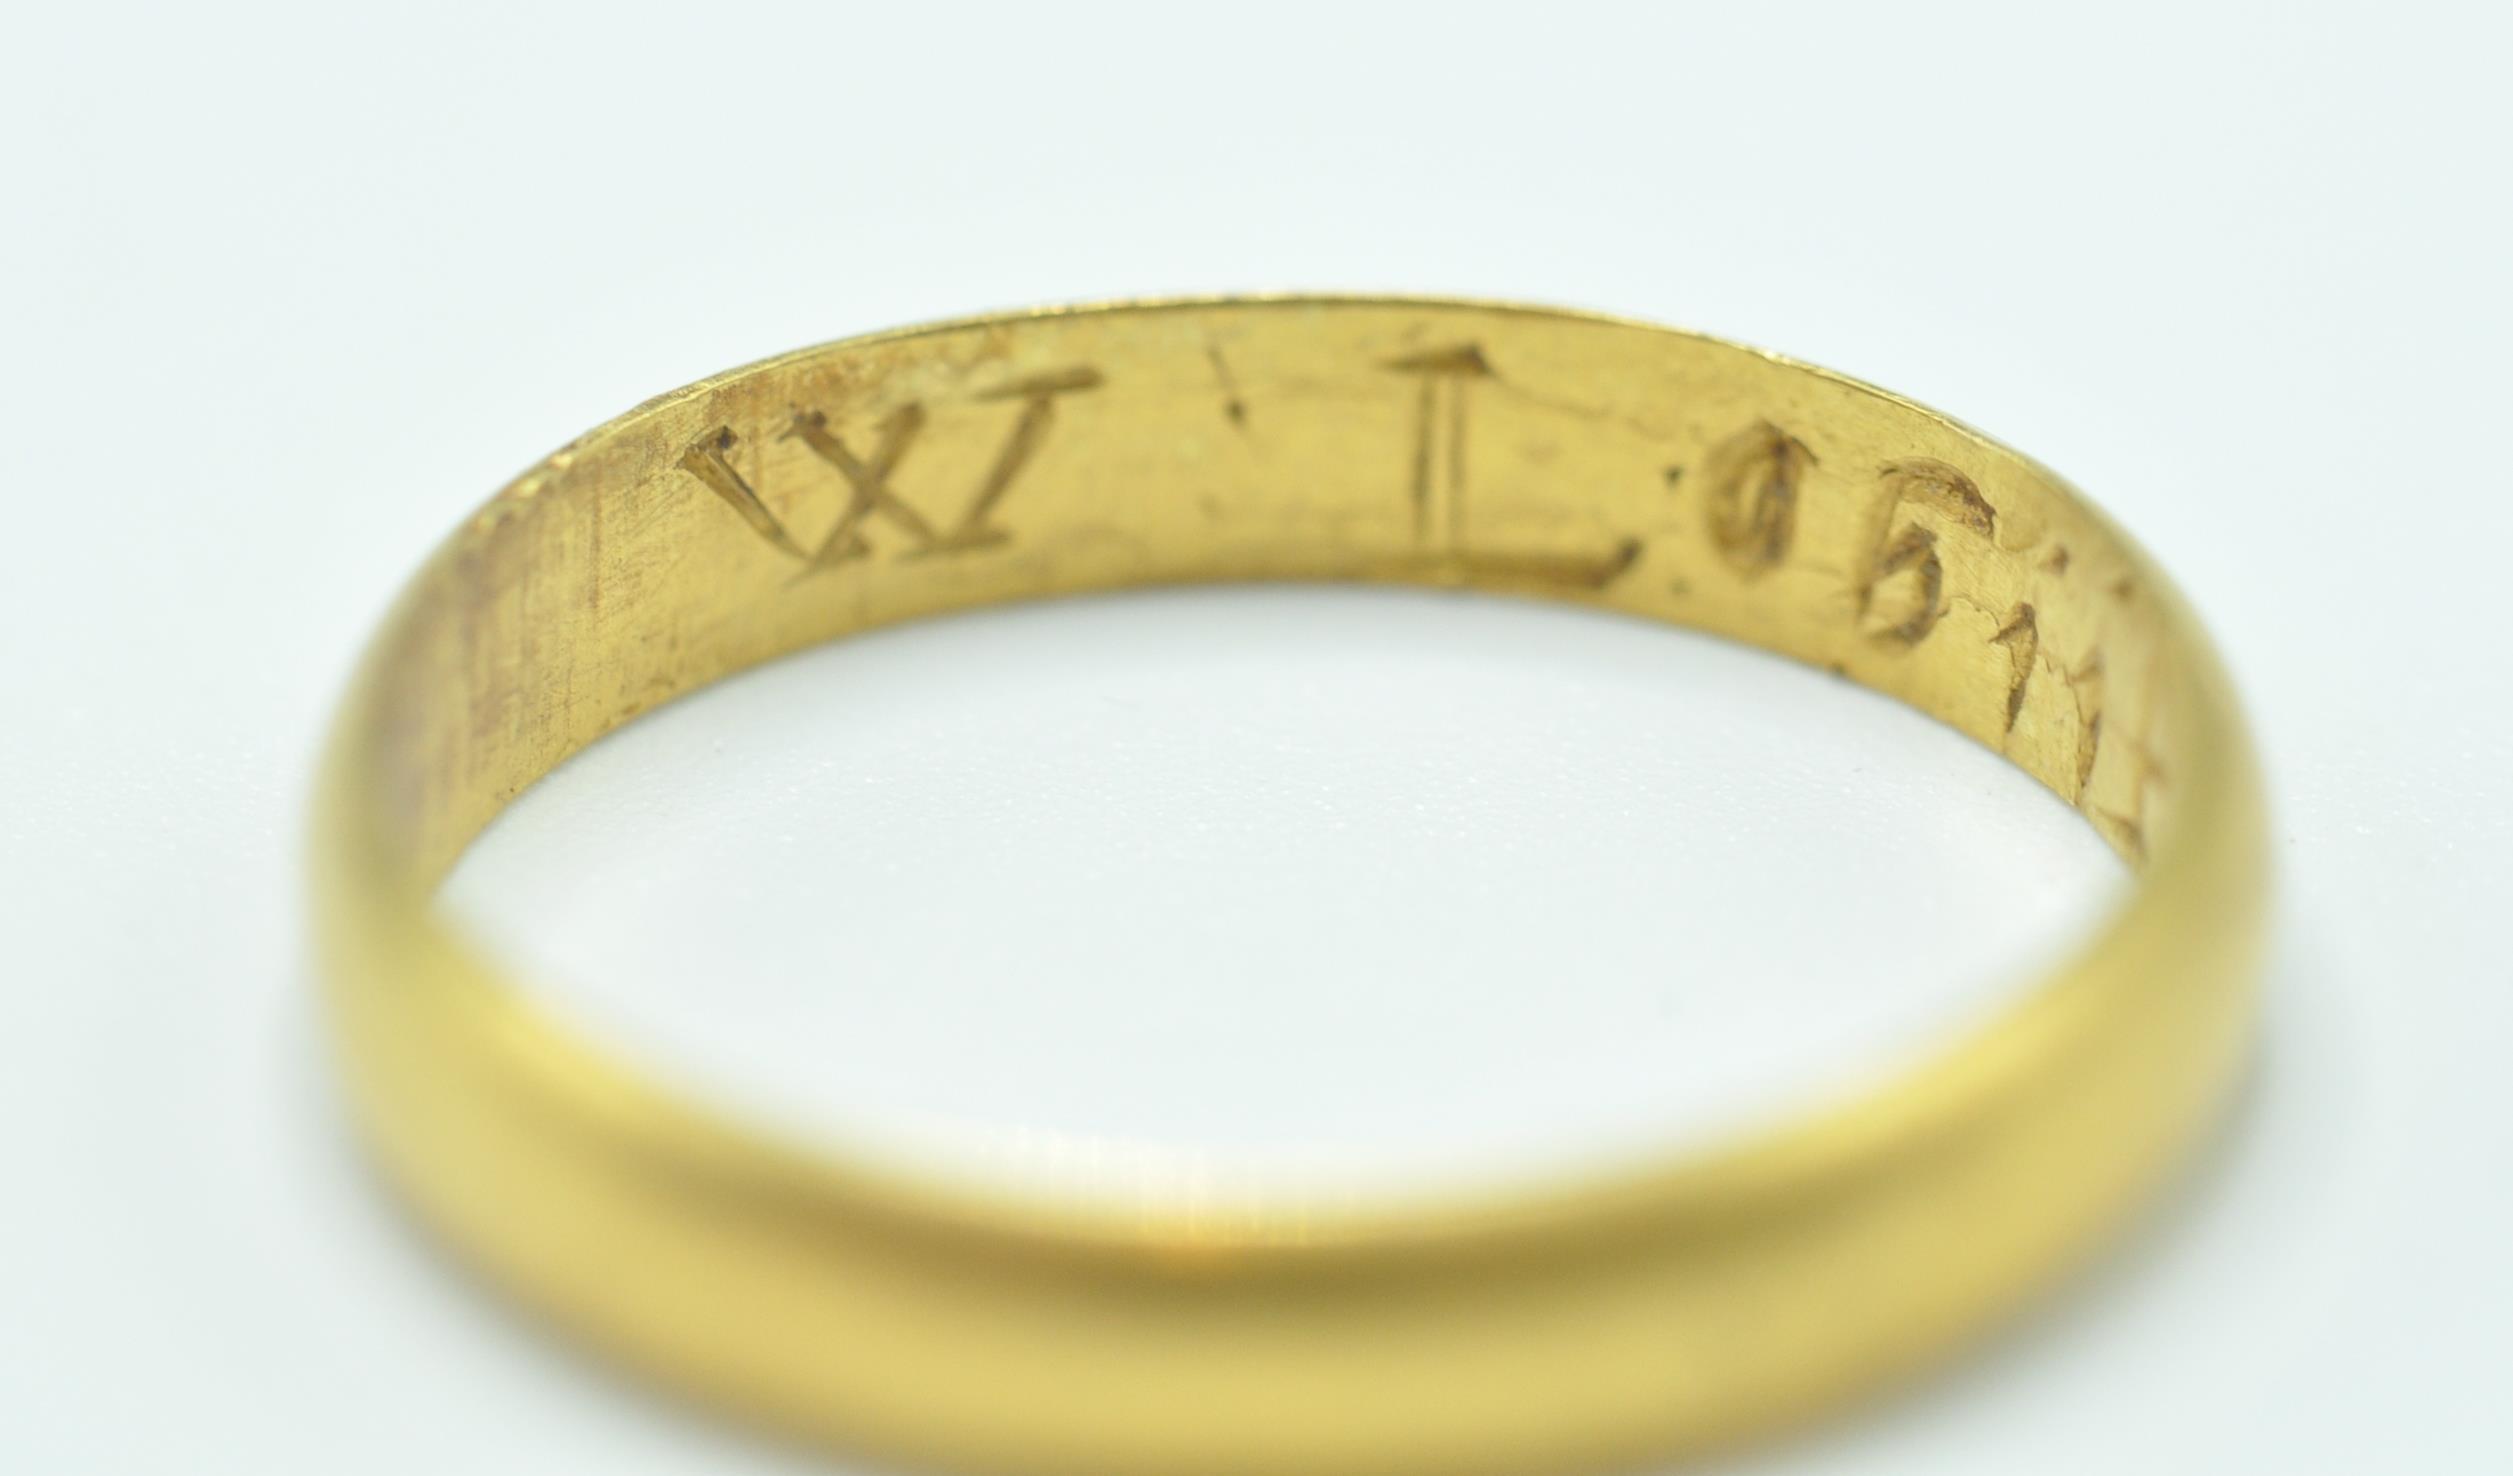 GEORGIAN GOLD MOMENTRO MORI MOURNING RING WITH SKULL - Image 5 of 9